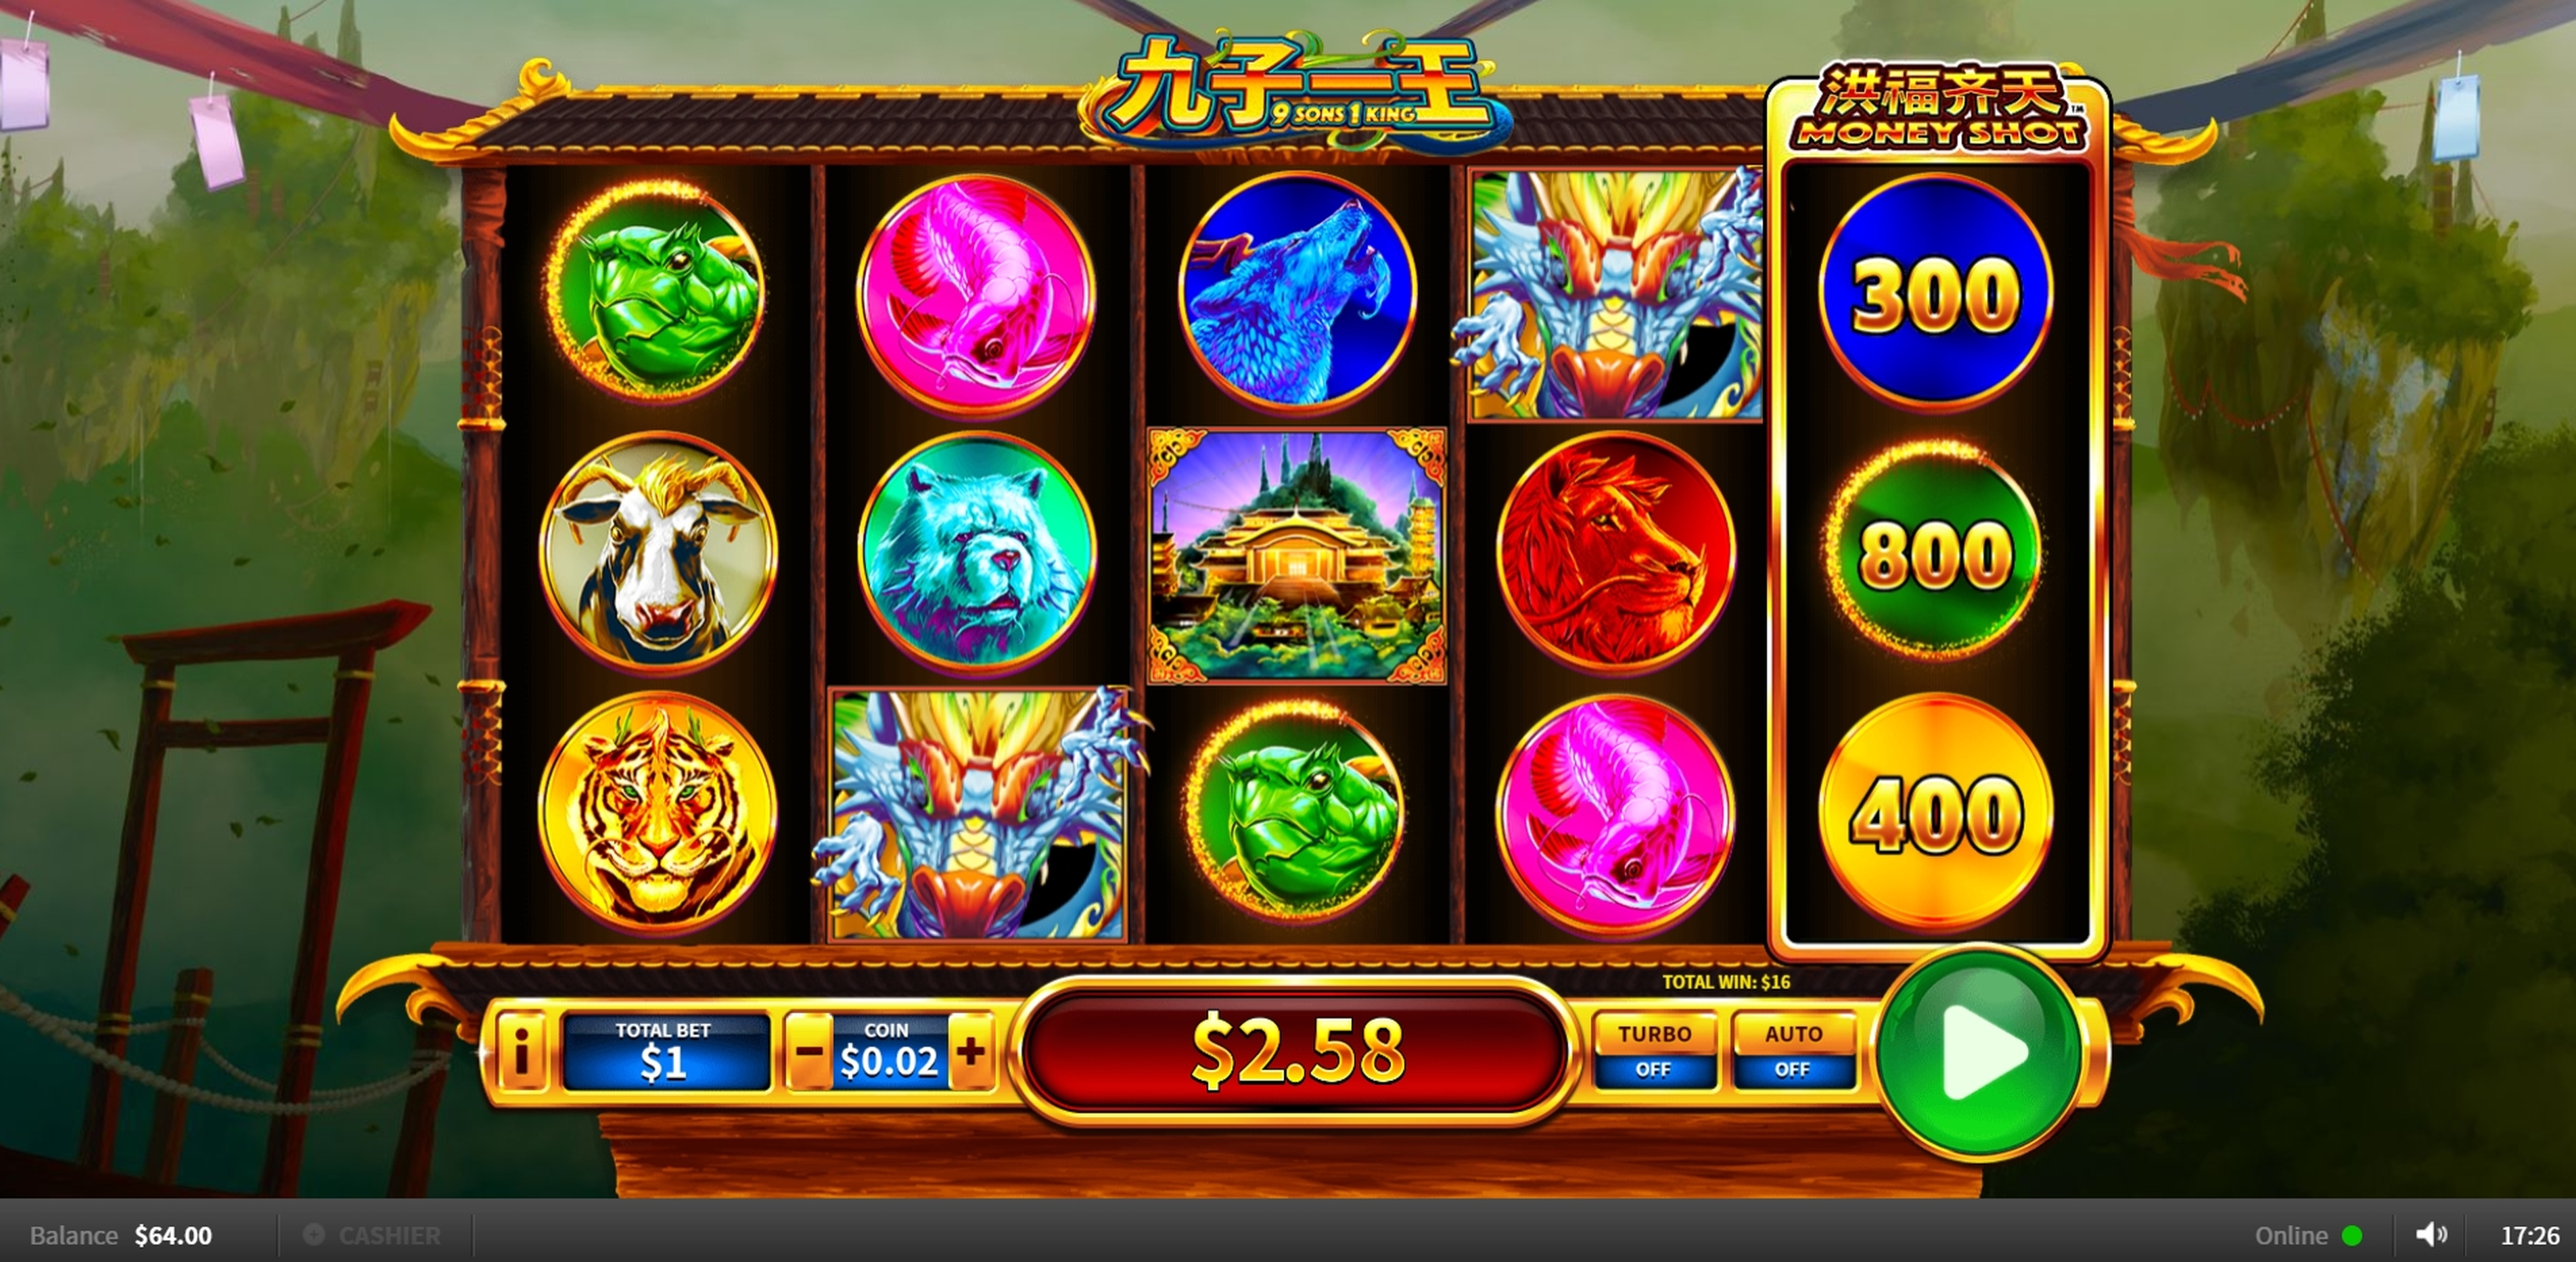 Win Money in 9 Sons, 1 King Free Slot Game by Skywind